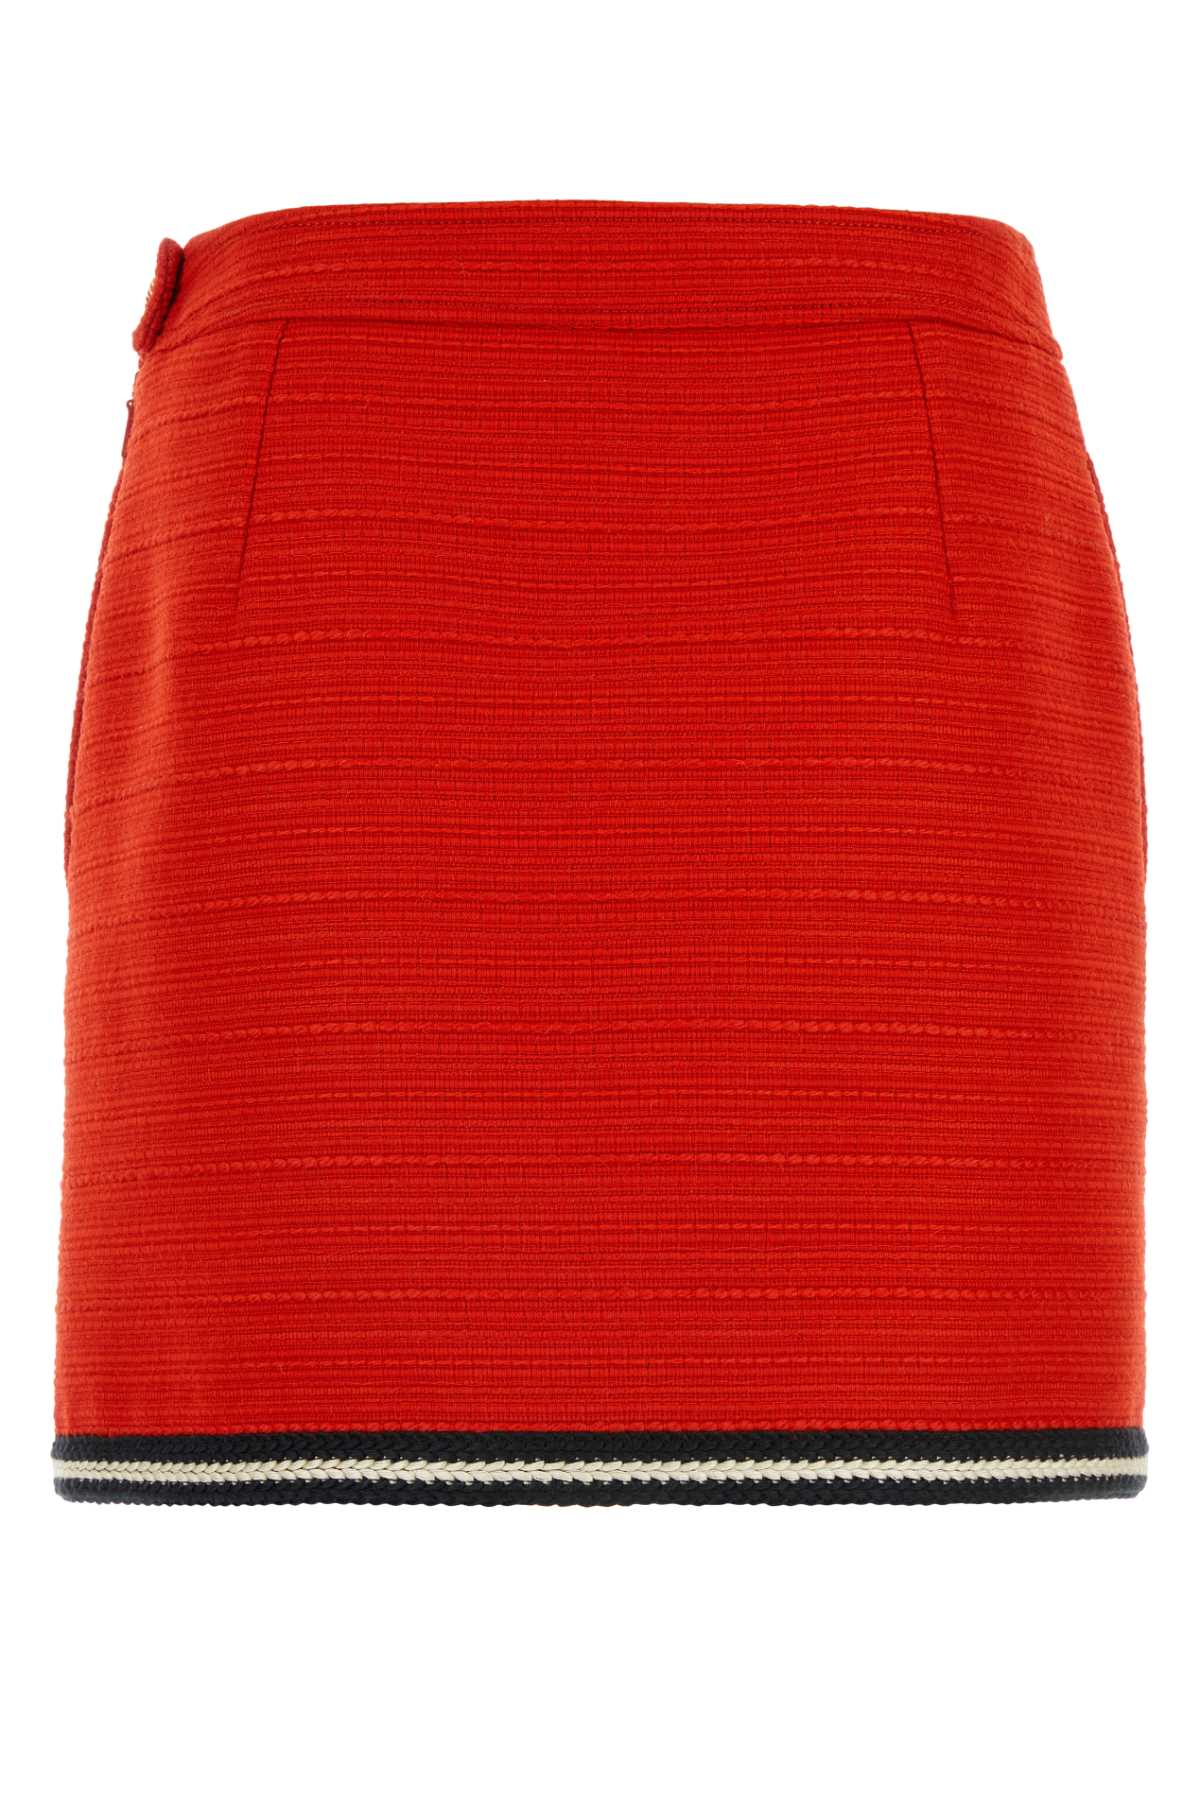 GUCCI RED TWEED SKIRT